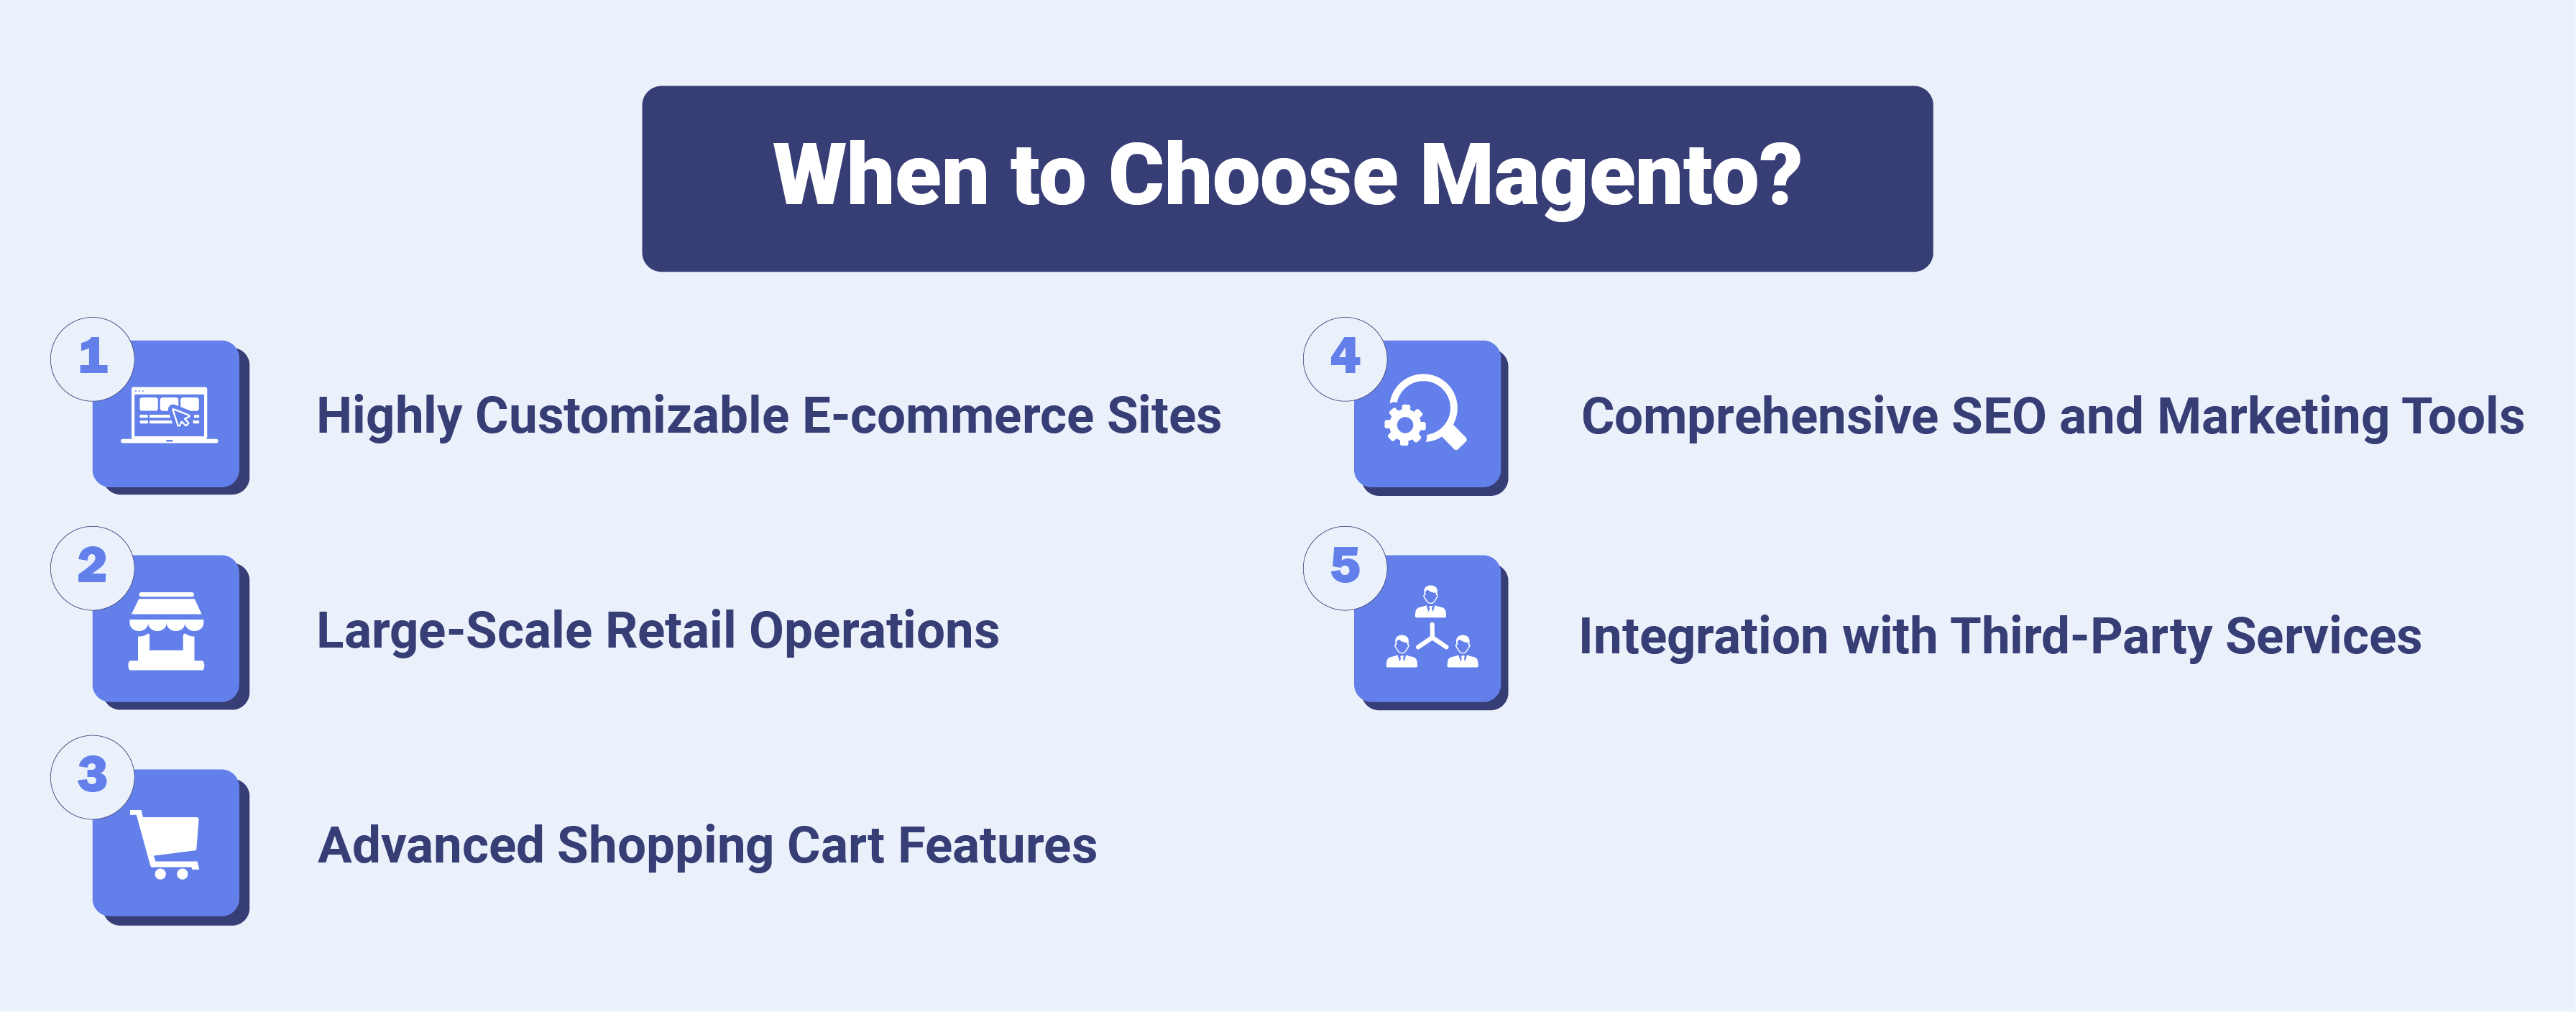 When is Magento a Better Choice